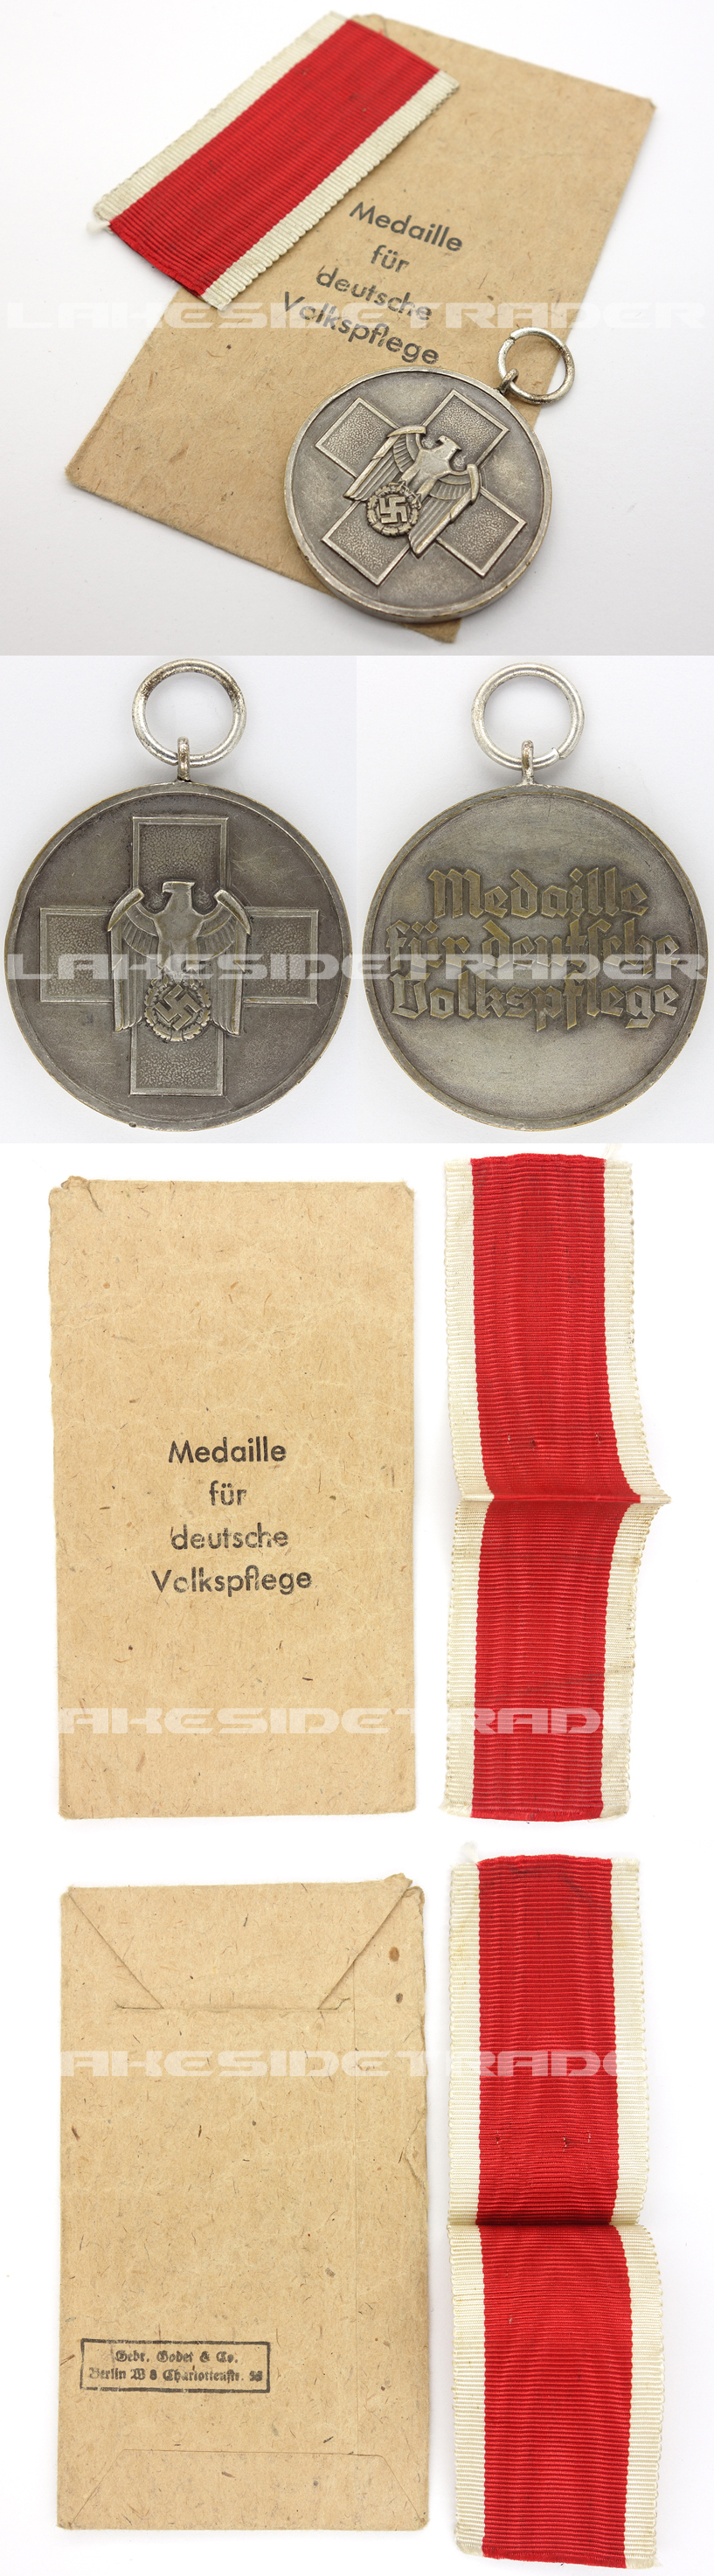 4th Class Social Welfare Medal in Issue Packet by Godet